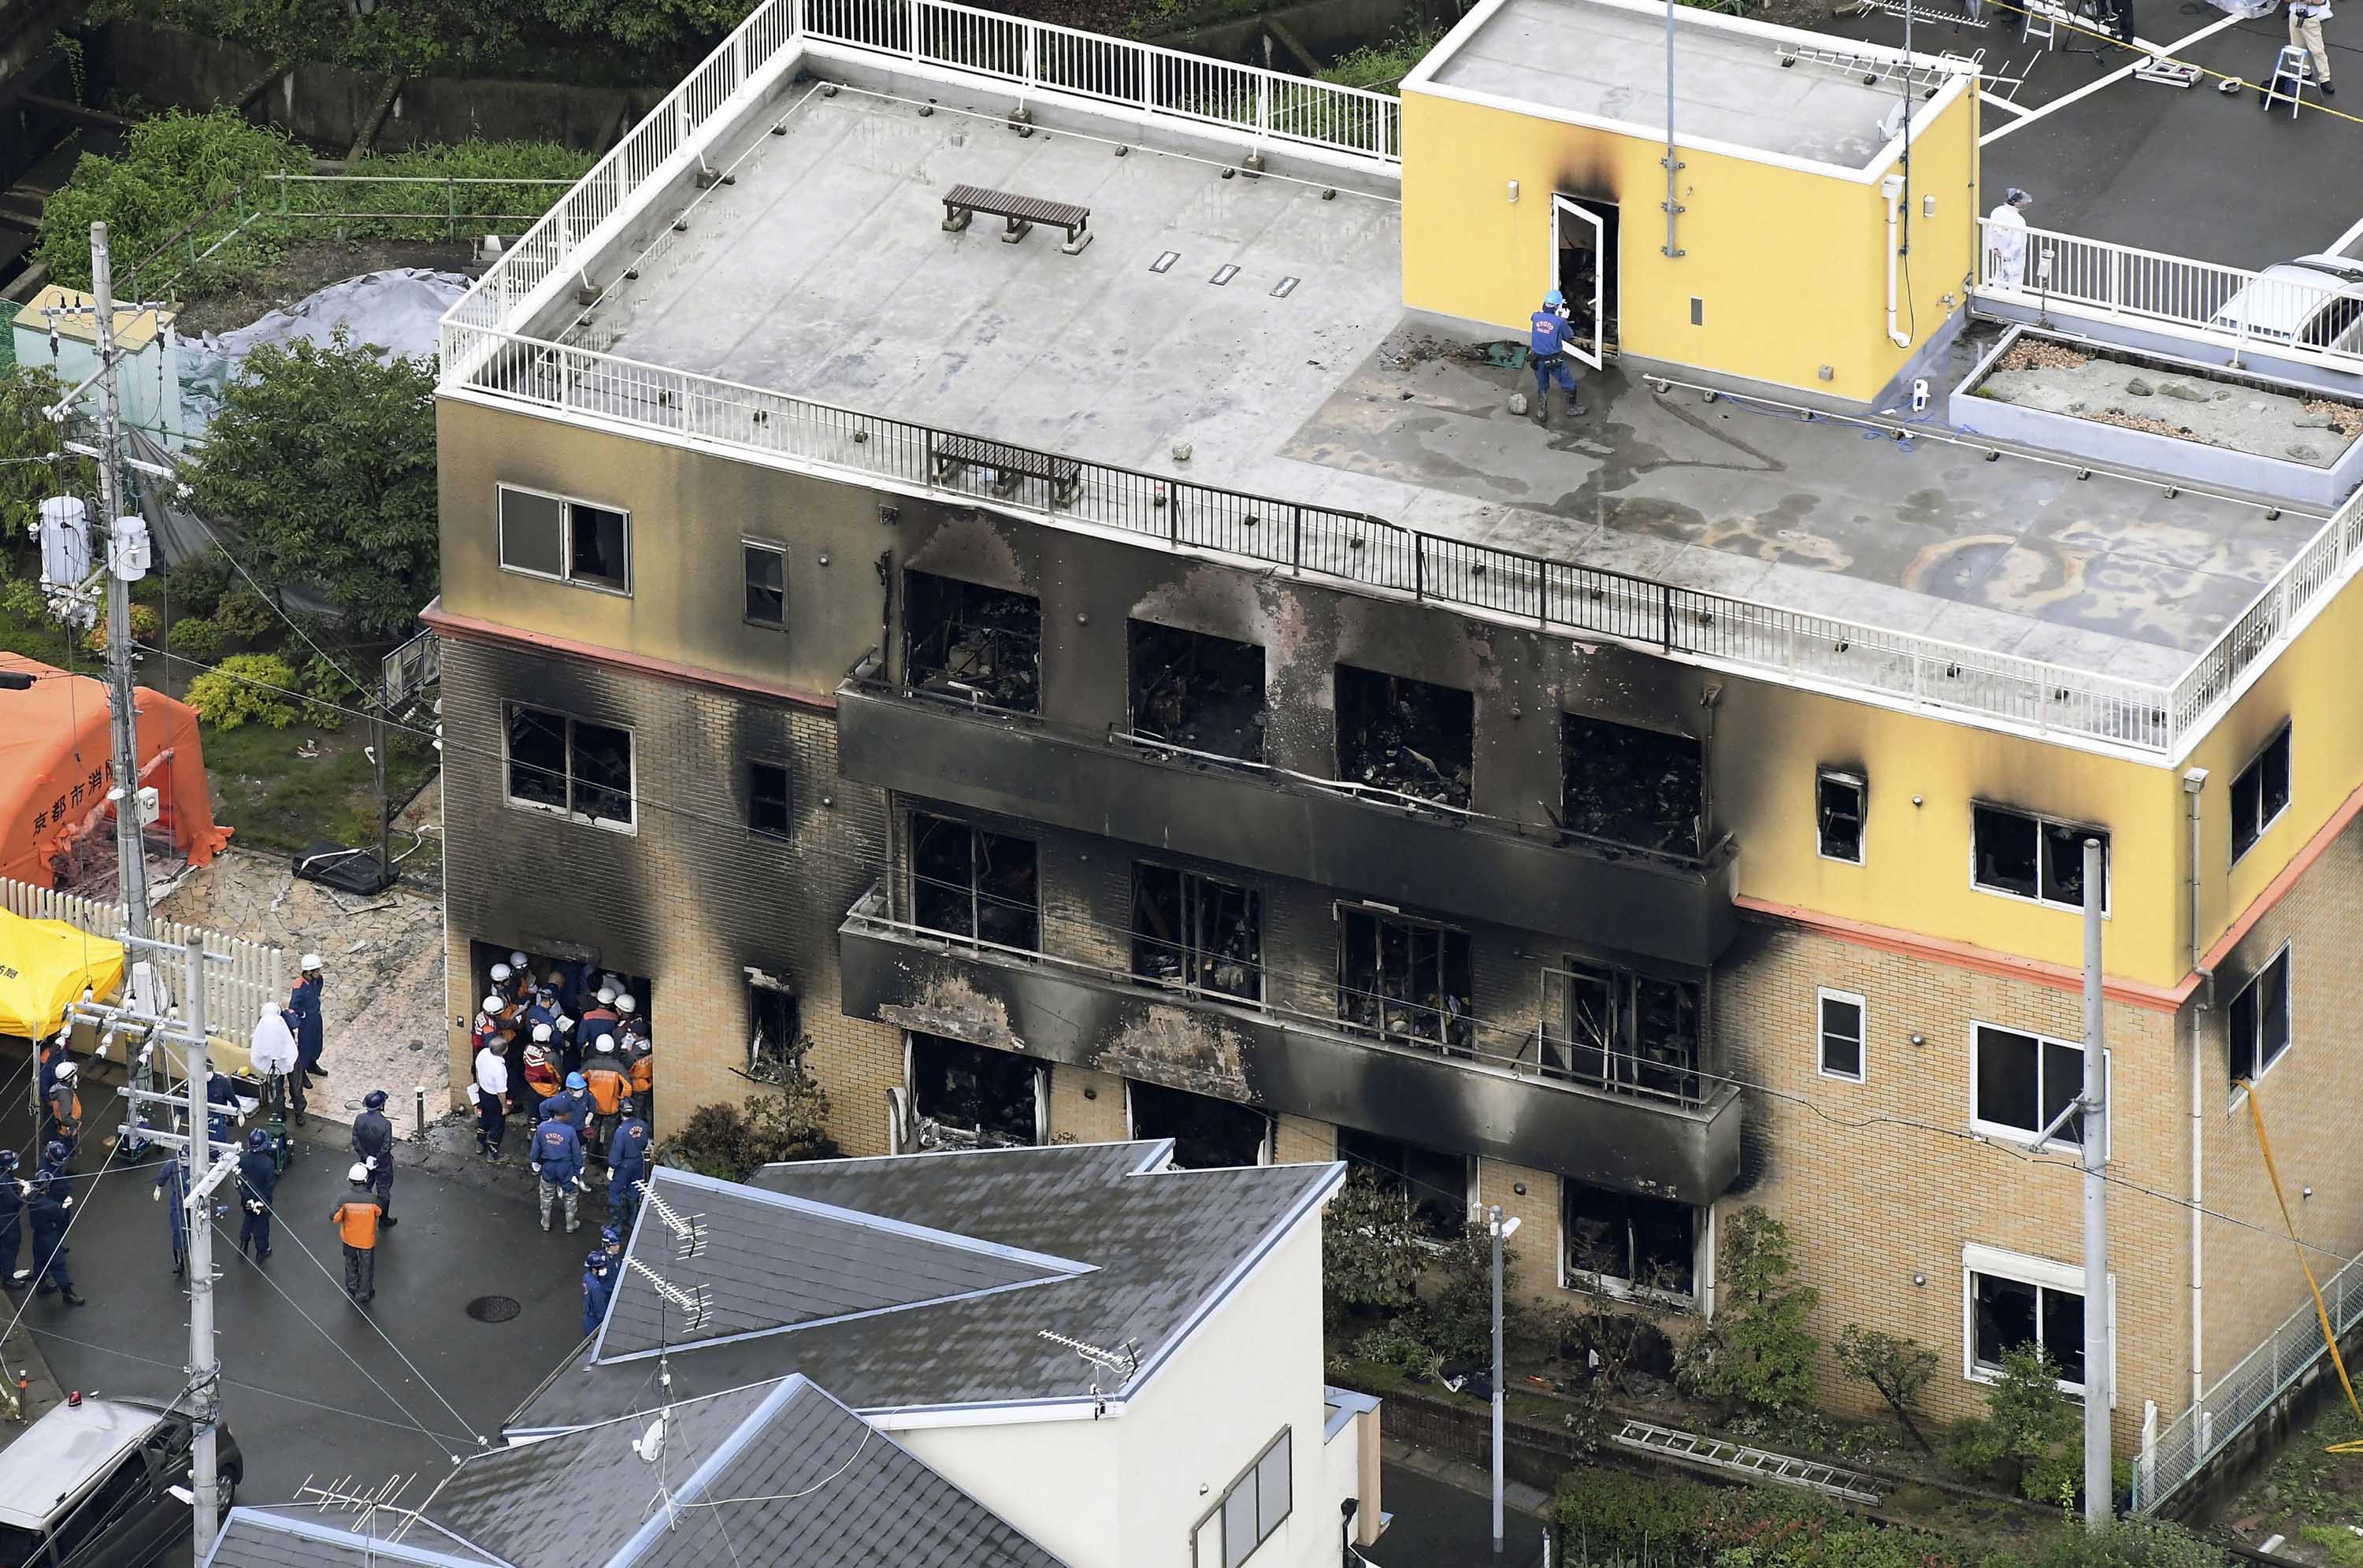 Kyoto animation arson suspect told police his work had been plagiarized |  CNN